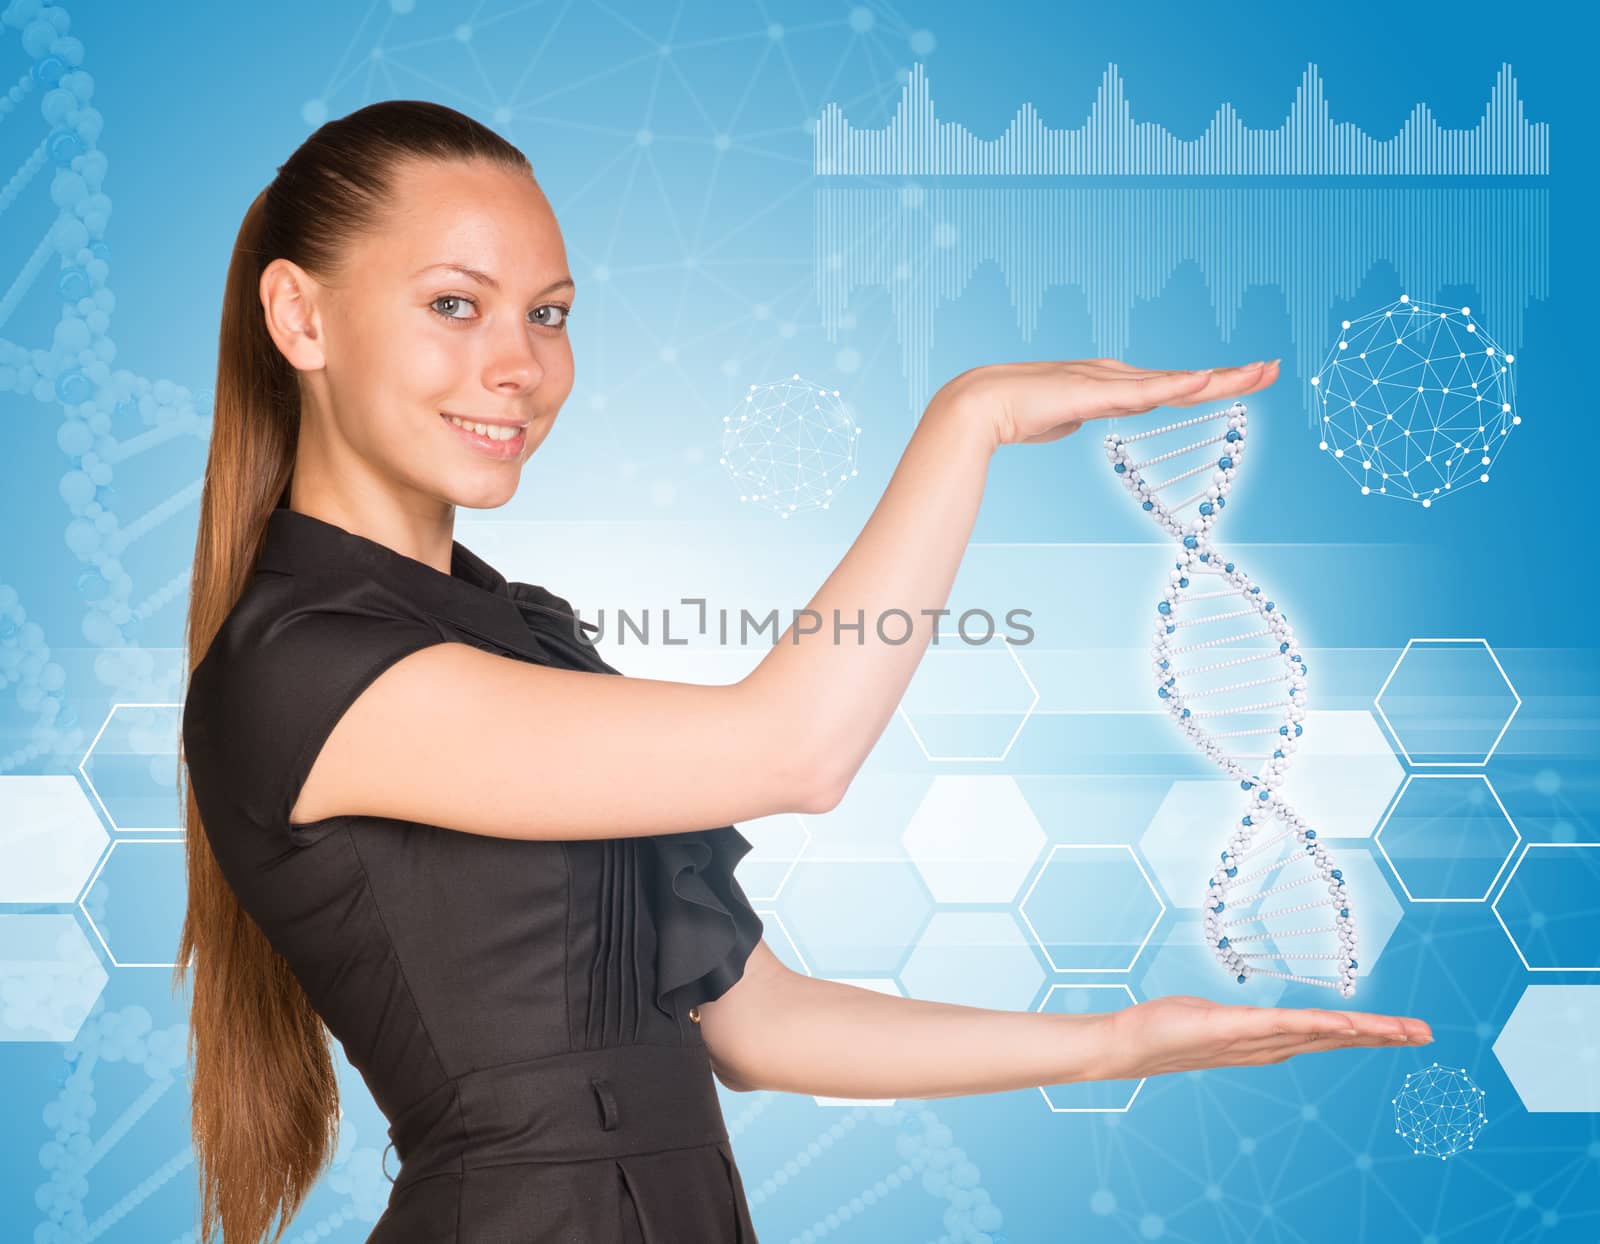 Beautiful businesswoman in dress smiling and holding model of DNA. Scientific and medical concept